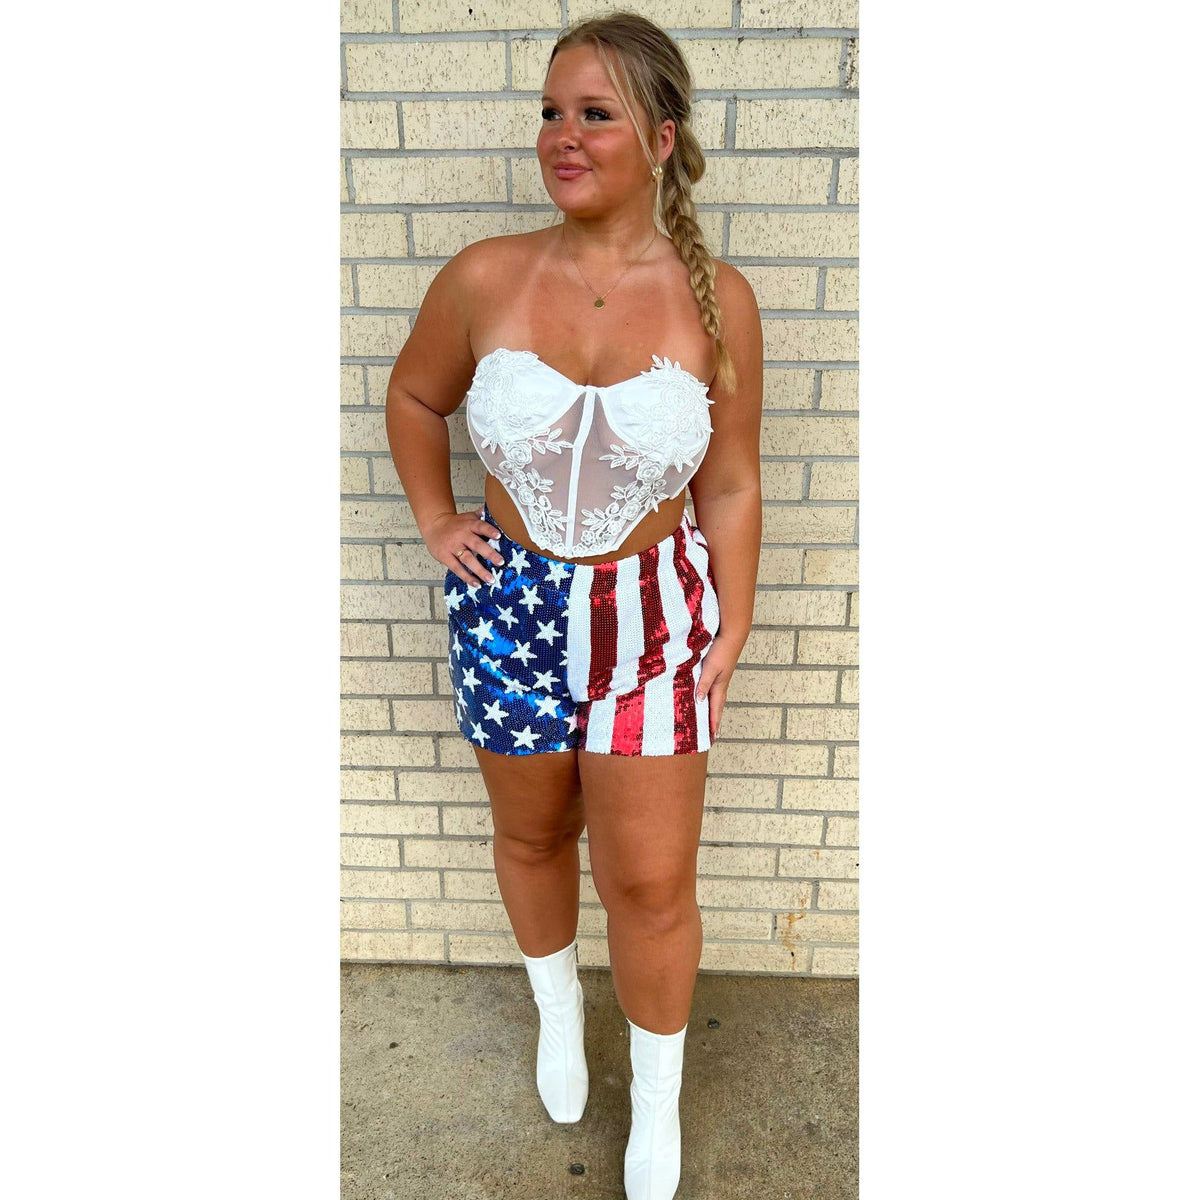 Savannah White Bustier Top (4th of july sexy)